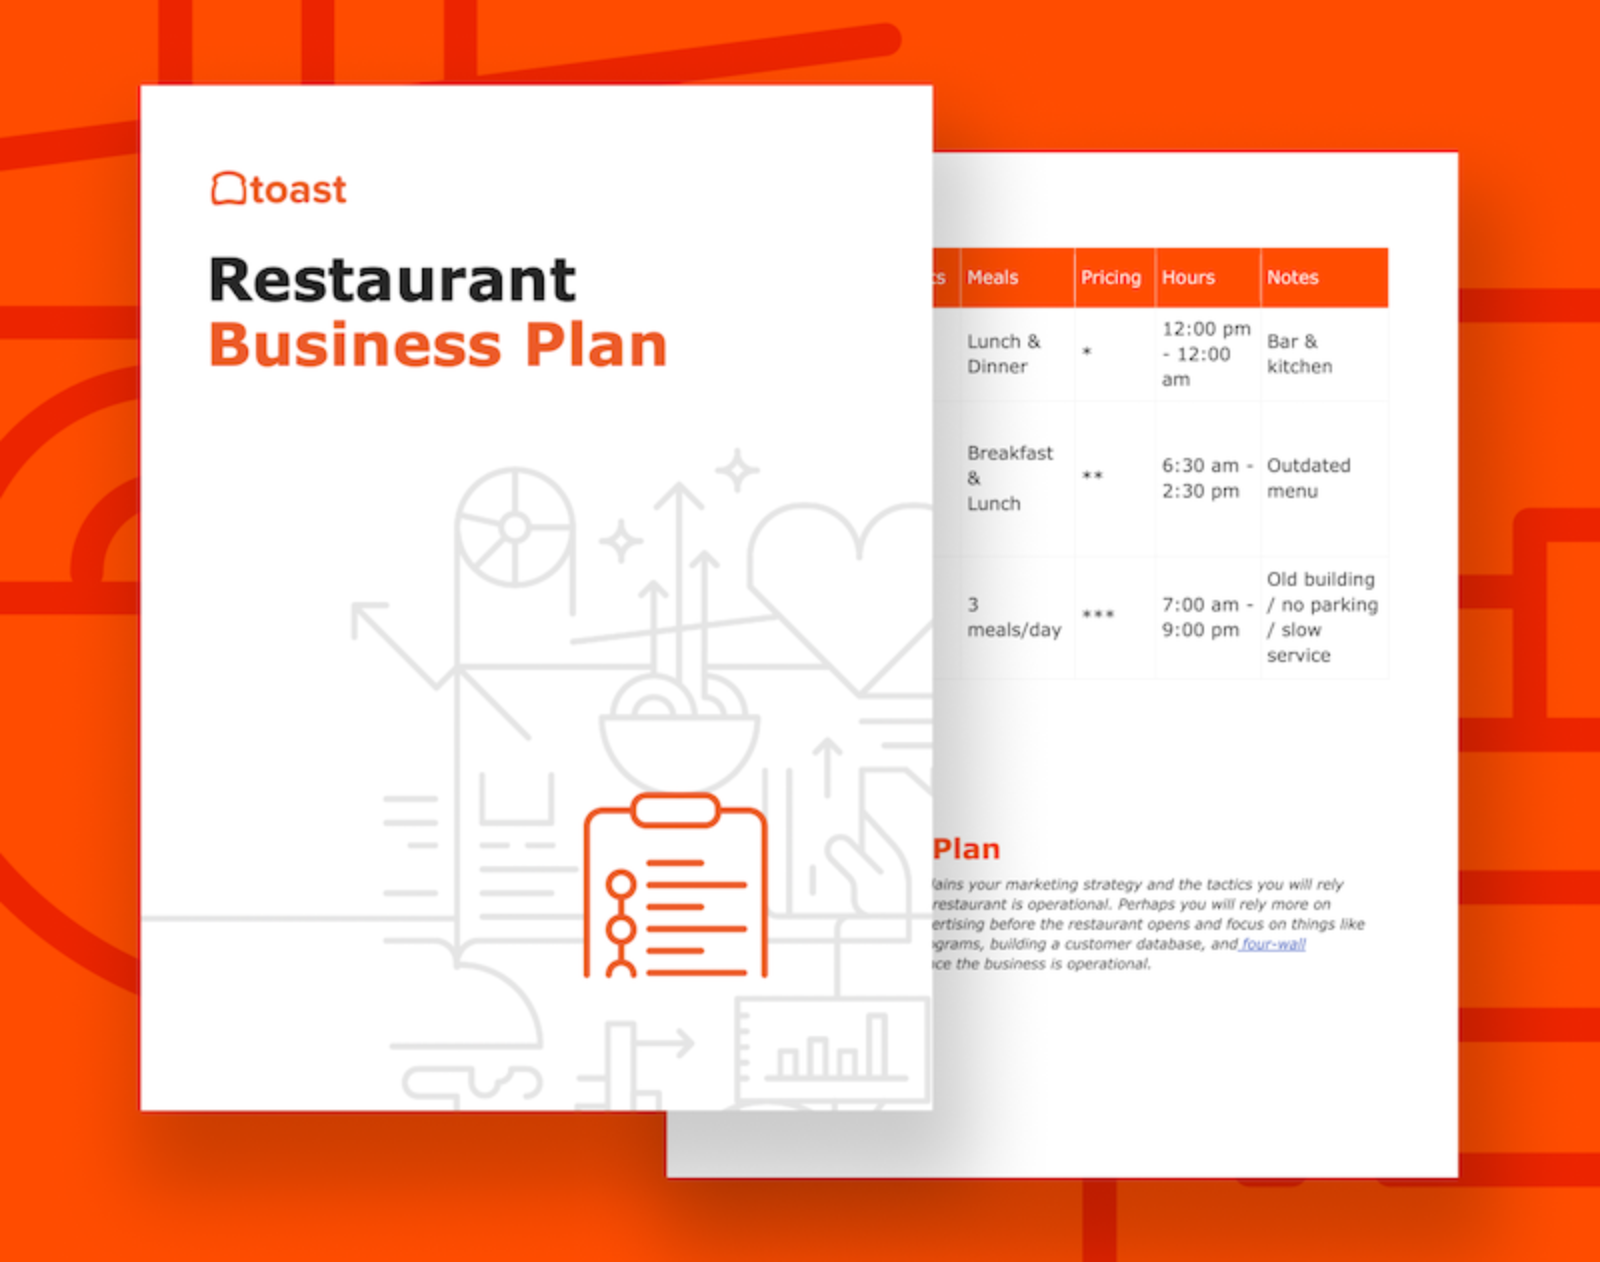 Restaurant Business Plan Template  Toast POS With Food Delivery Business Plan Template